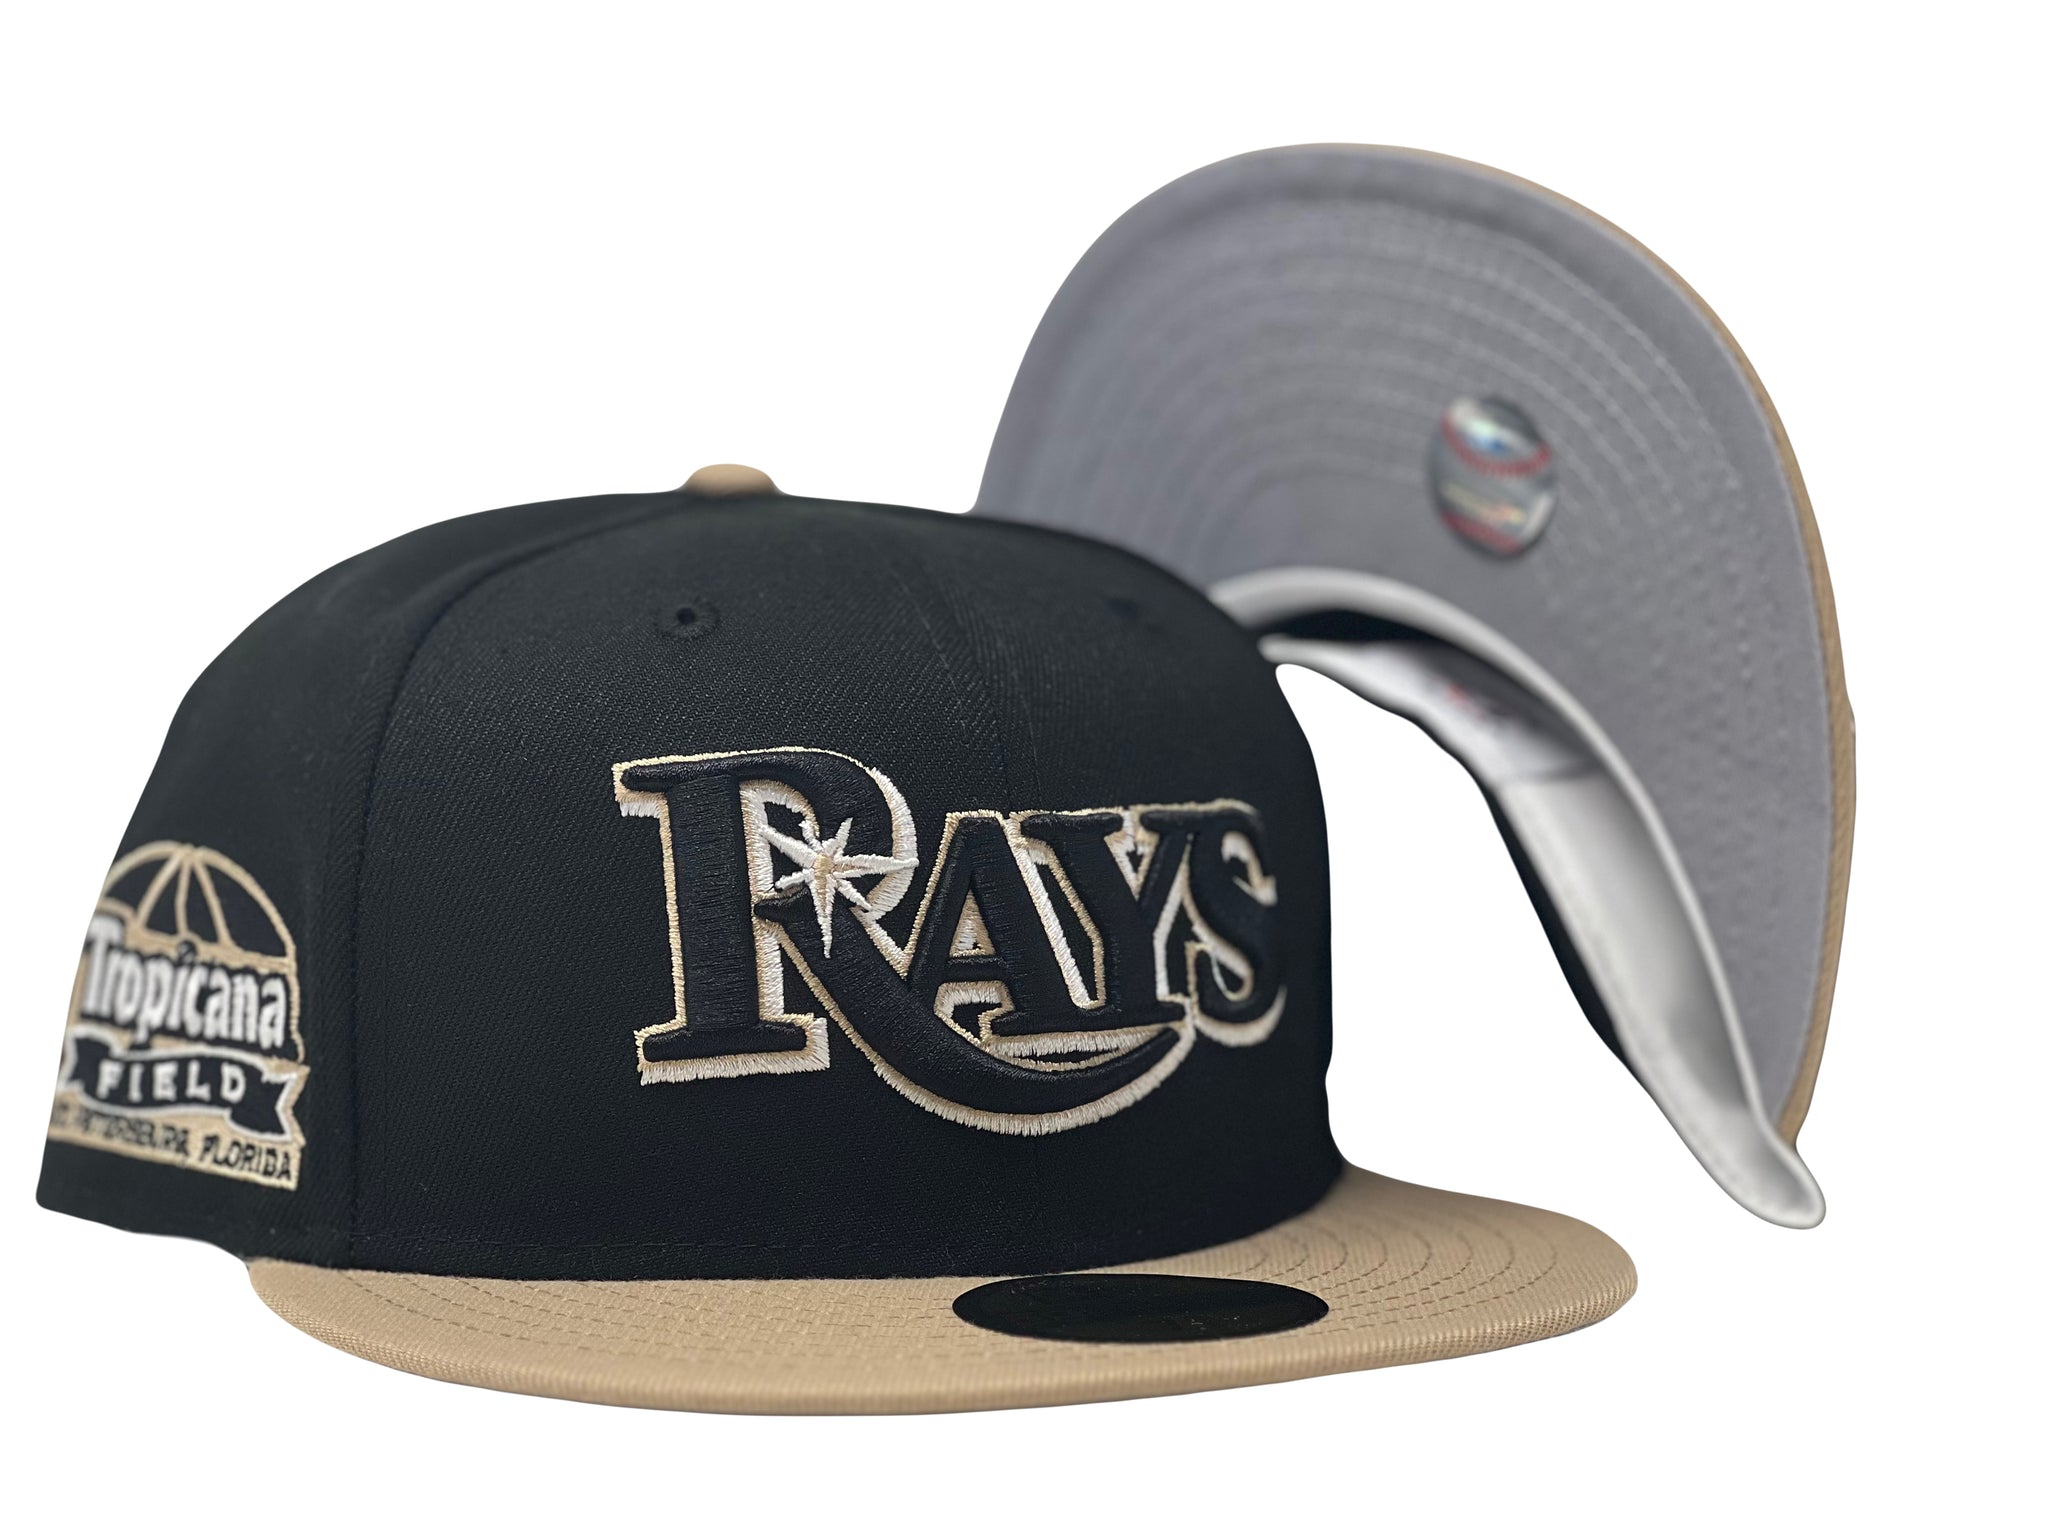 Tampa Bay Rays Black MLB Fan Cap, Hats for sale